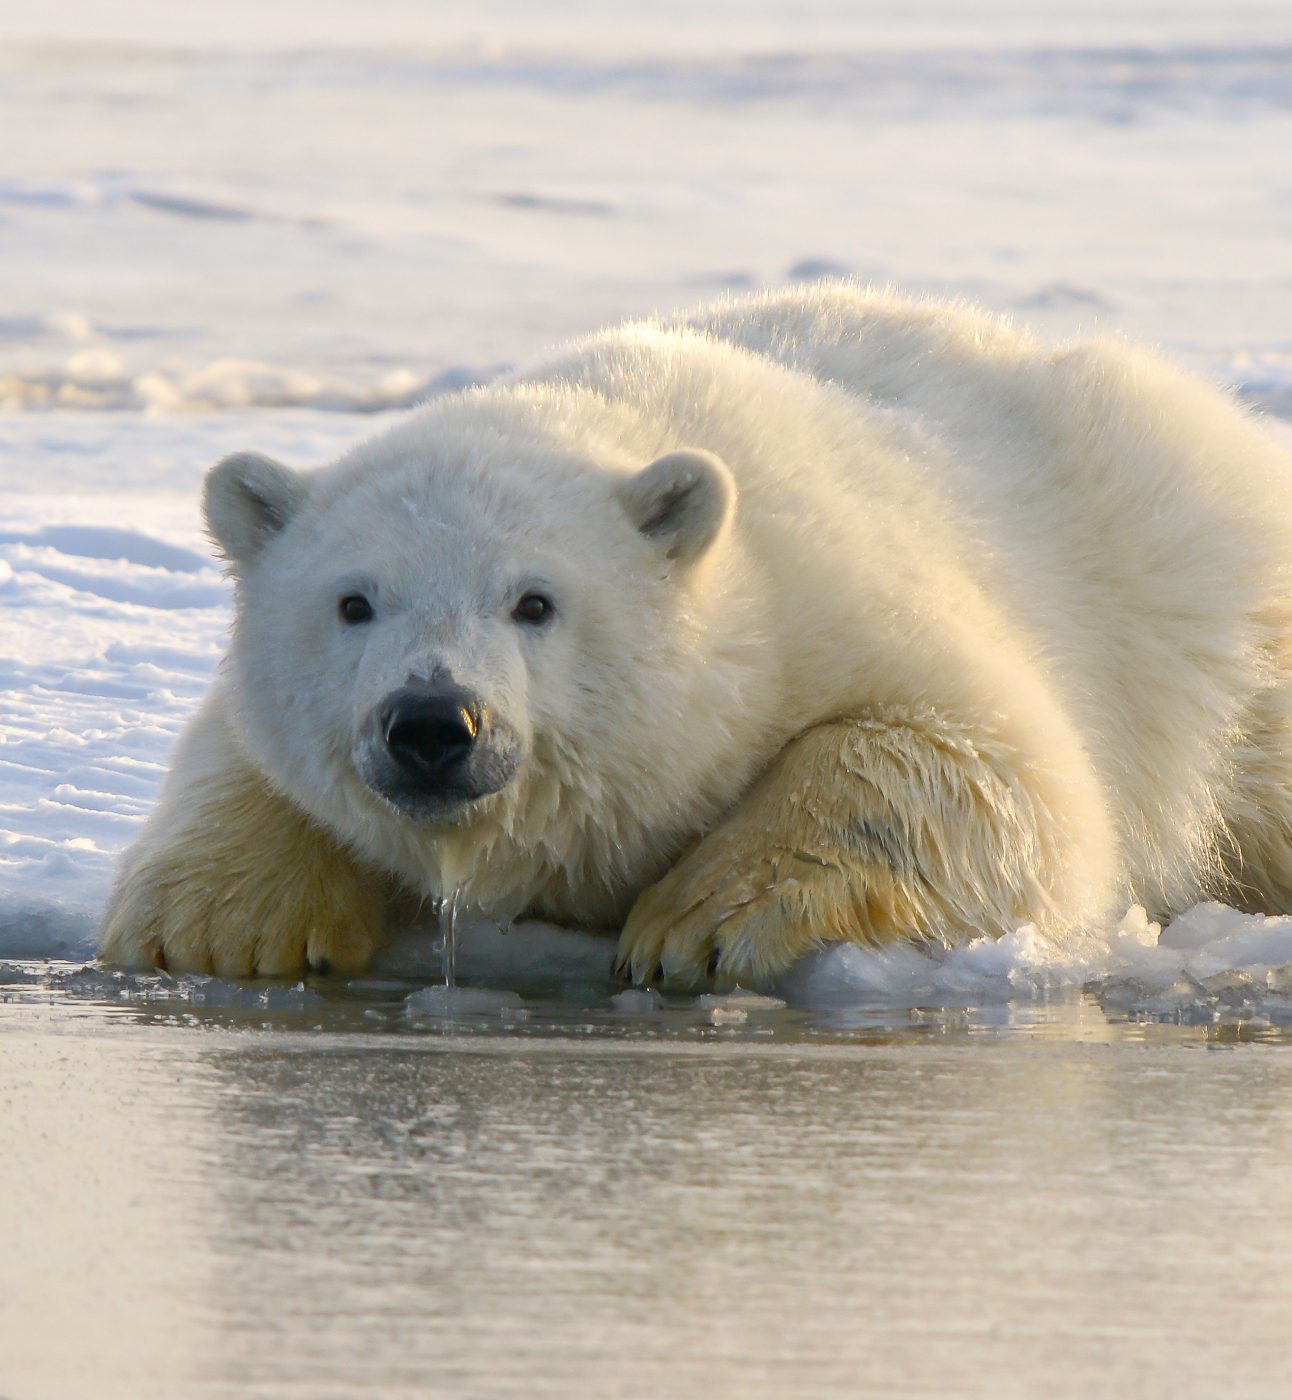 A polar bear lying on the ice with its paws in the water